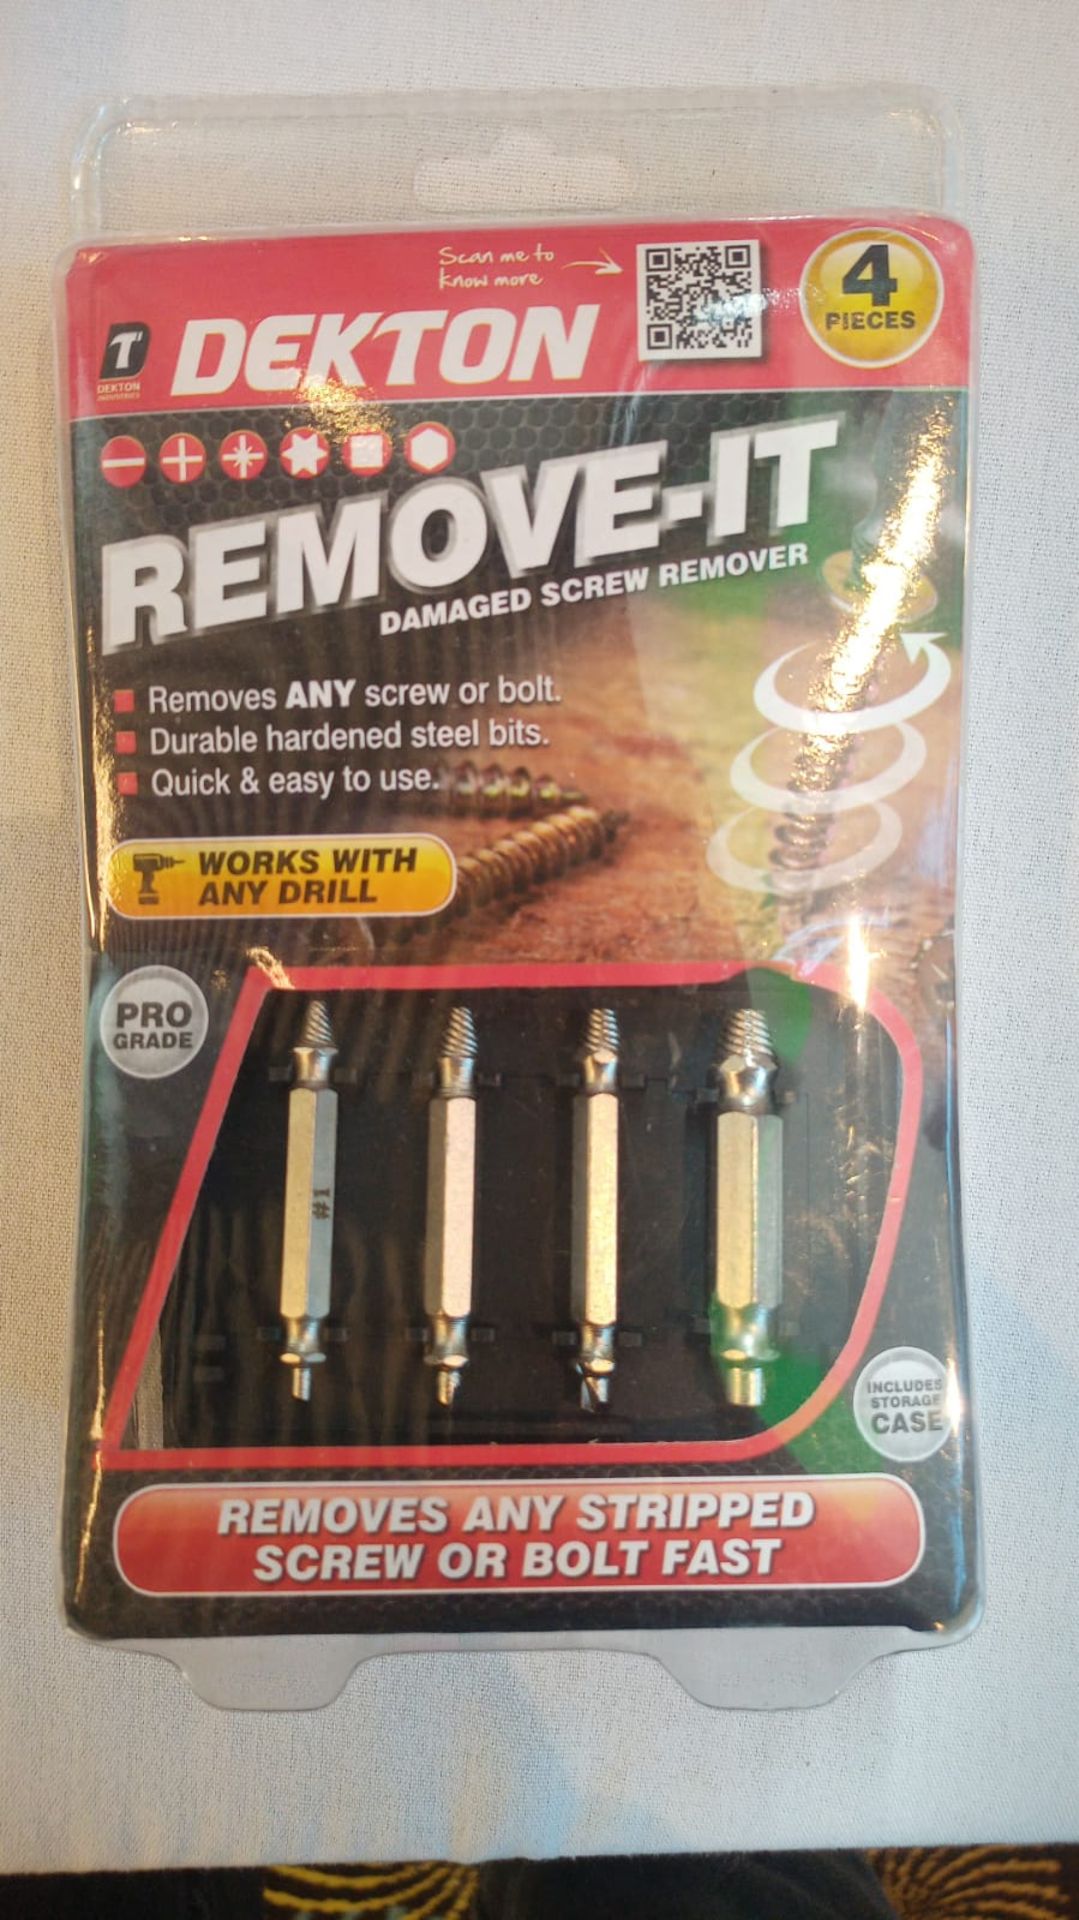 100 X BRAND NEW AND SEALED DEKTON REMOVE-IT DAMAGED SCREW REMOVER - RRP £7 EACH